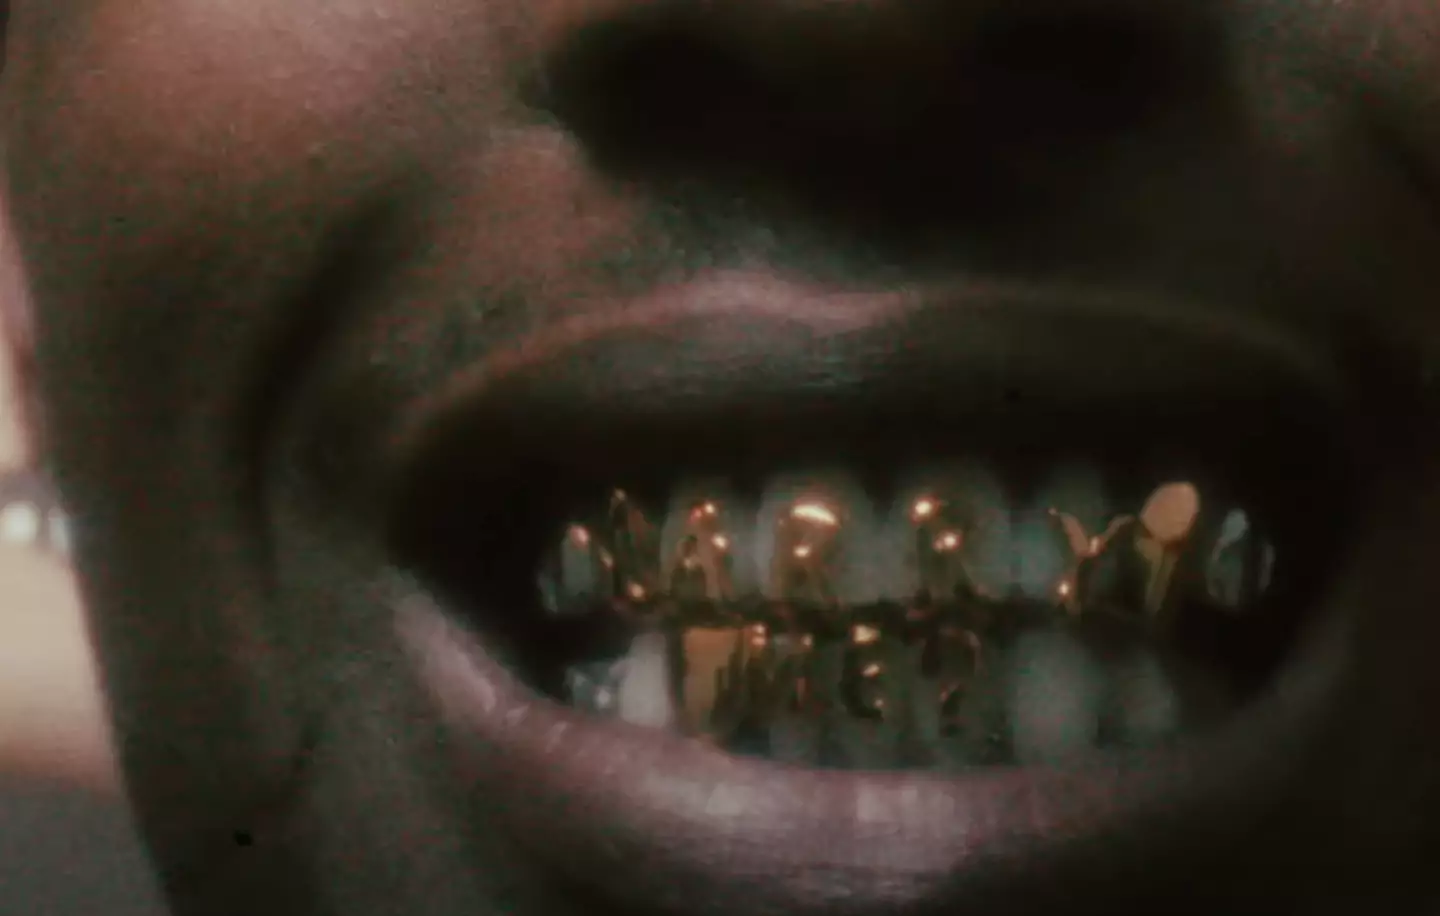 A$AP Rocky's grills in his D.M.B music video read, 'Marry me'.